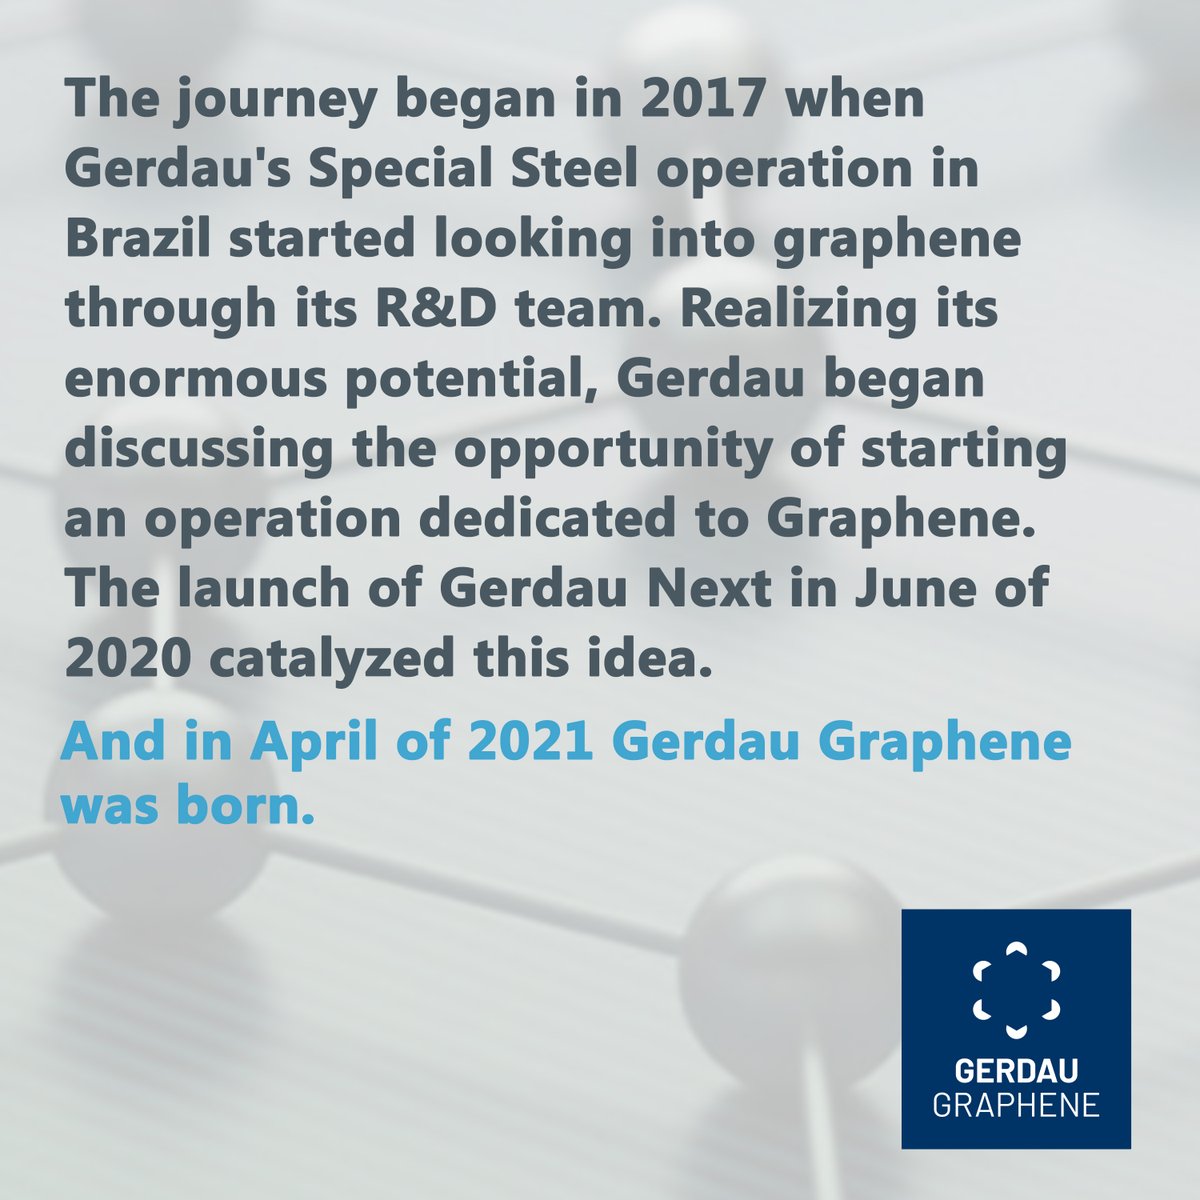 We create solutions from carbon nanomaterials (such as graphene) that help companies in the paint, concrete and plastics segments to enter the ESG agenda and even improve the performance of their products. To learn more, contact info@gerdaugraphene.com. #GerdauGraphene